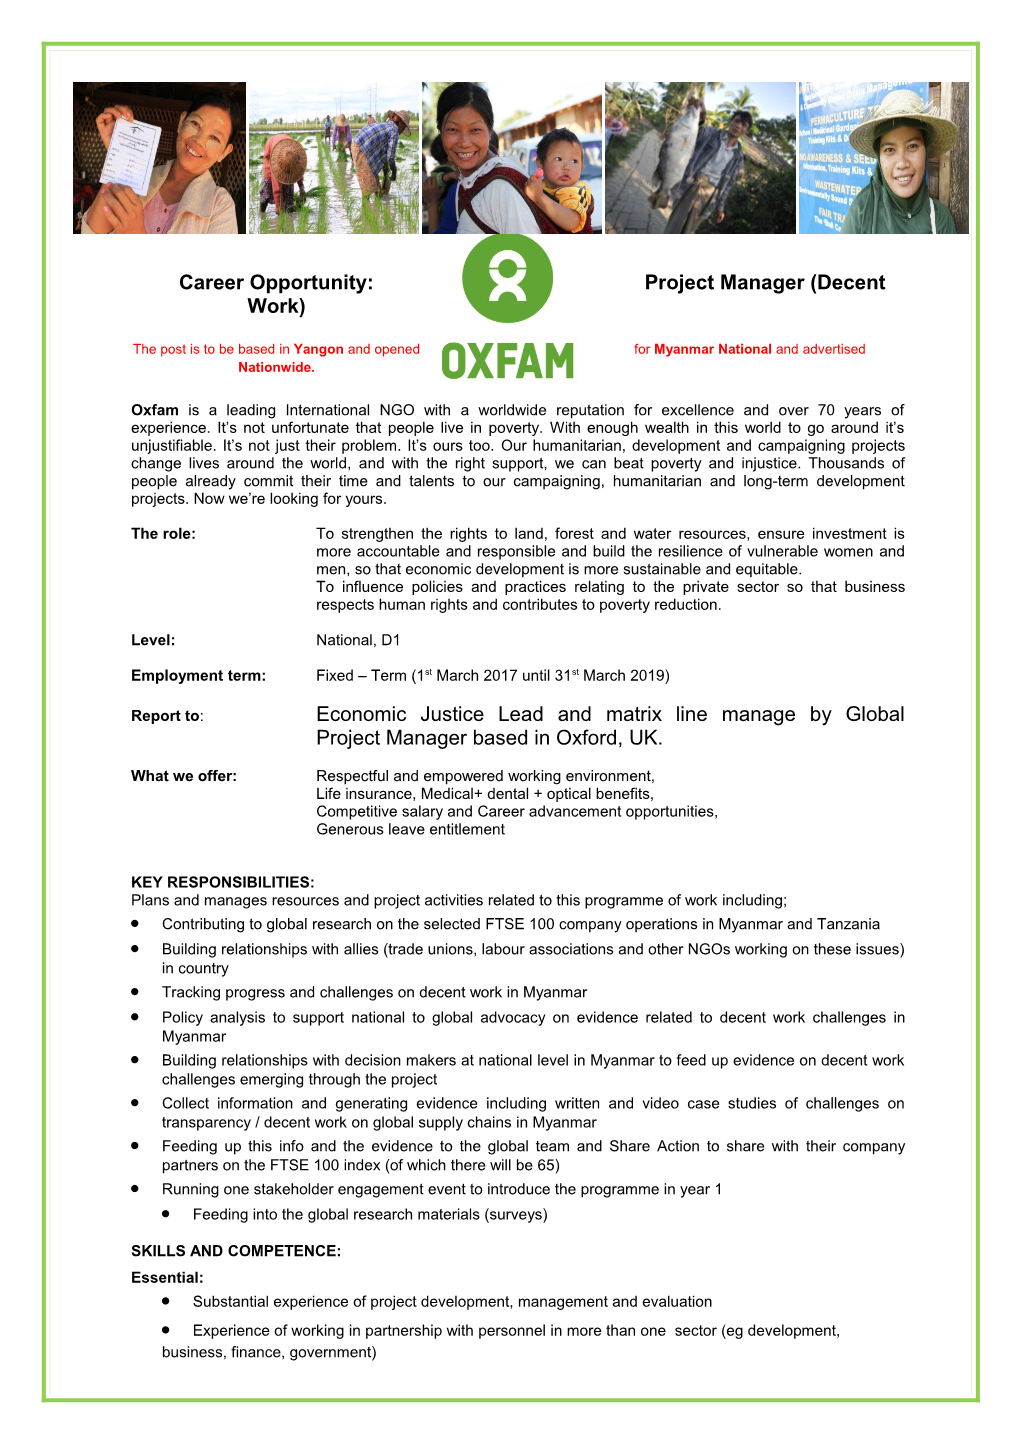 Career Opportunity:Project Manager (Decent Work)